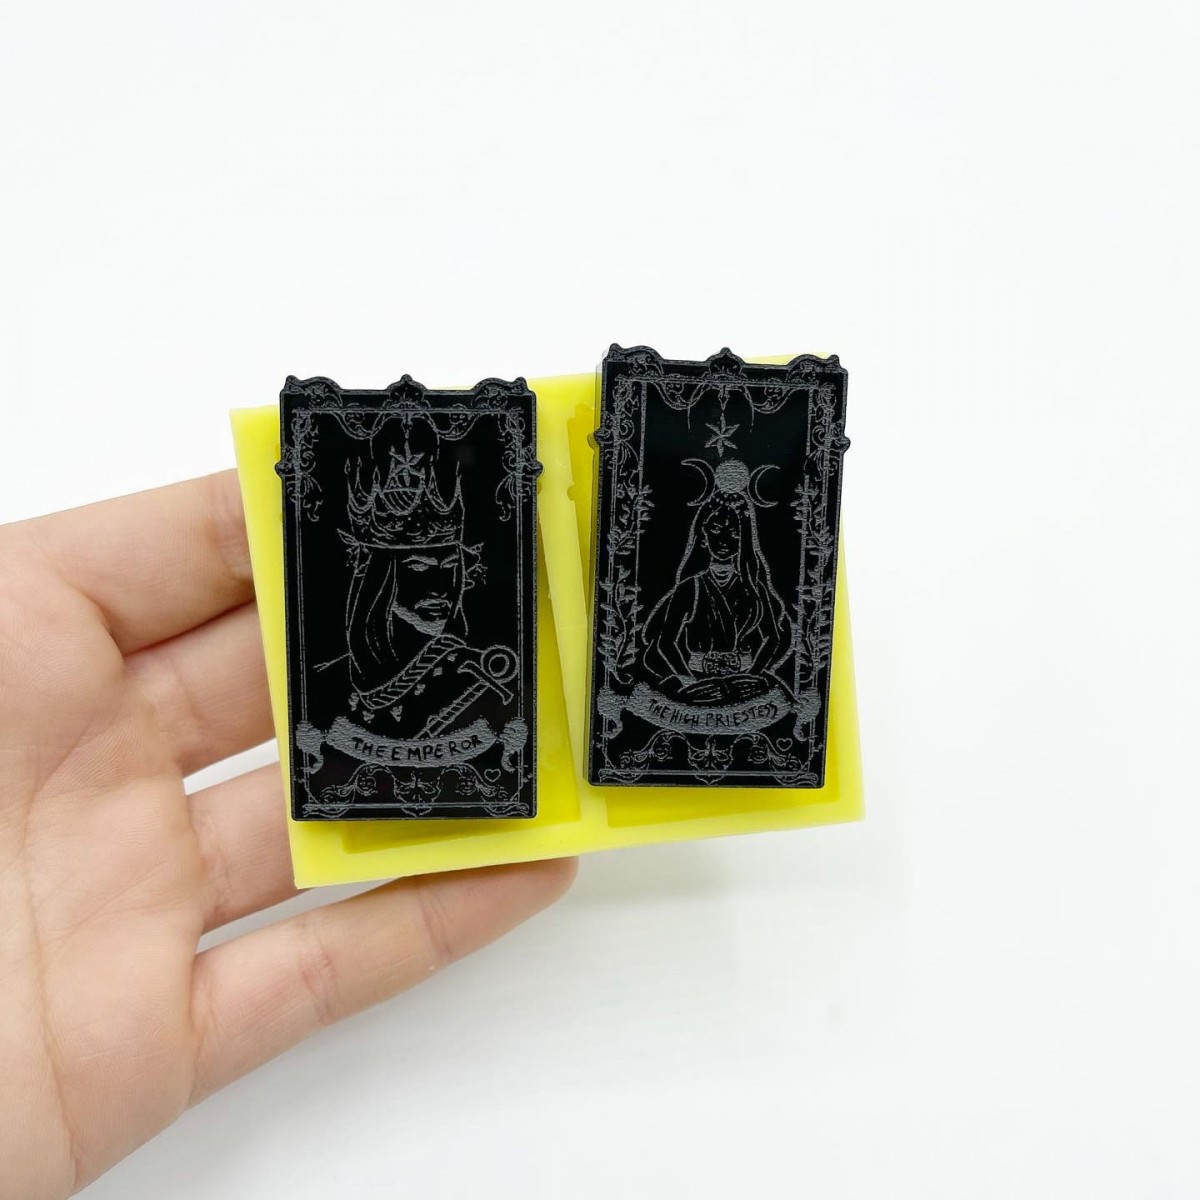 Set of "The Emperor" and "The High Priestess" Tarot Cards Mold